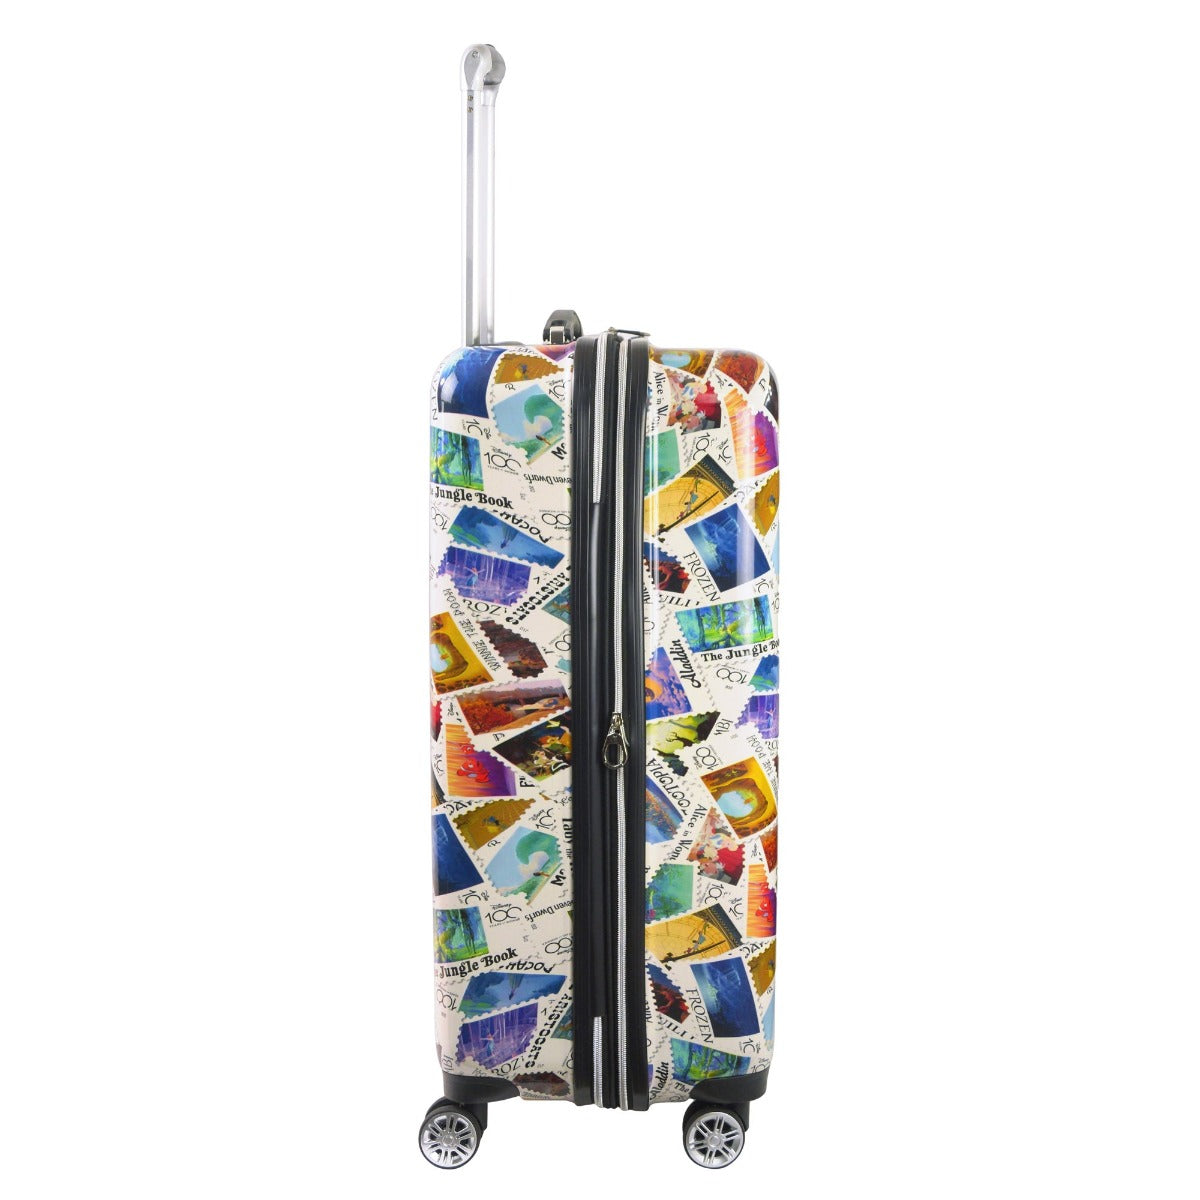 Ful Disney 100 Years Anniversary Limited Editoin 30-inch hardshell rolling luggage for travel